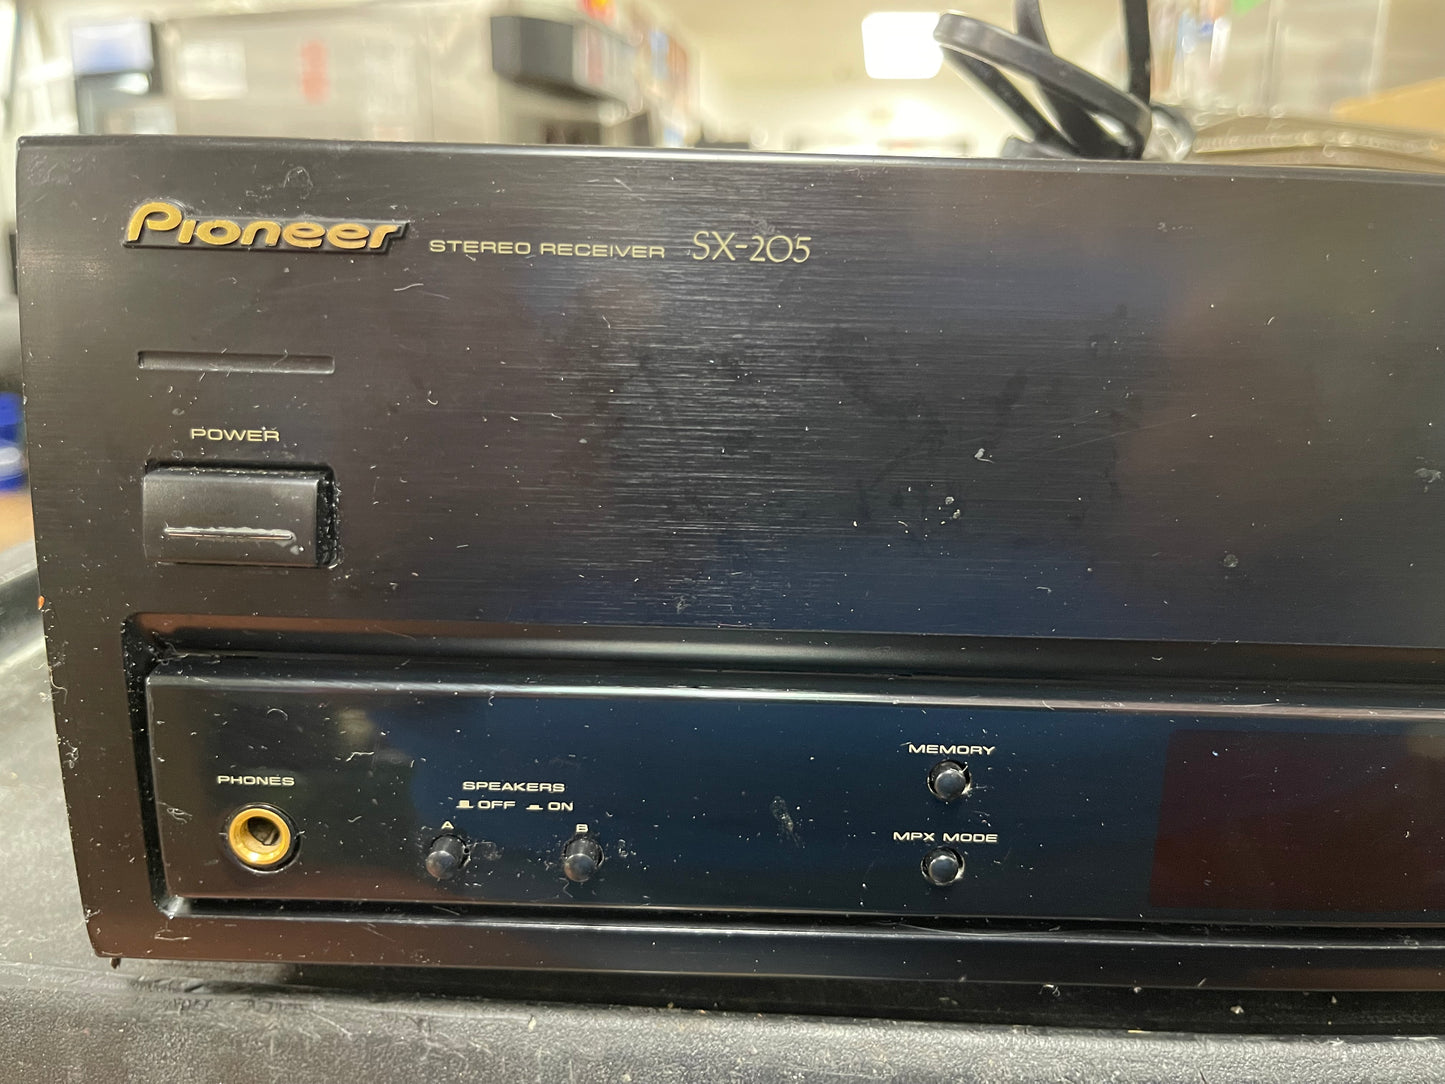 PIONEER Stereo Receiver SX-205 Built in tuner